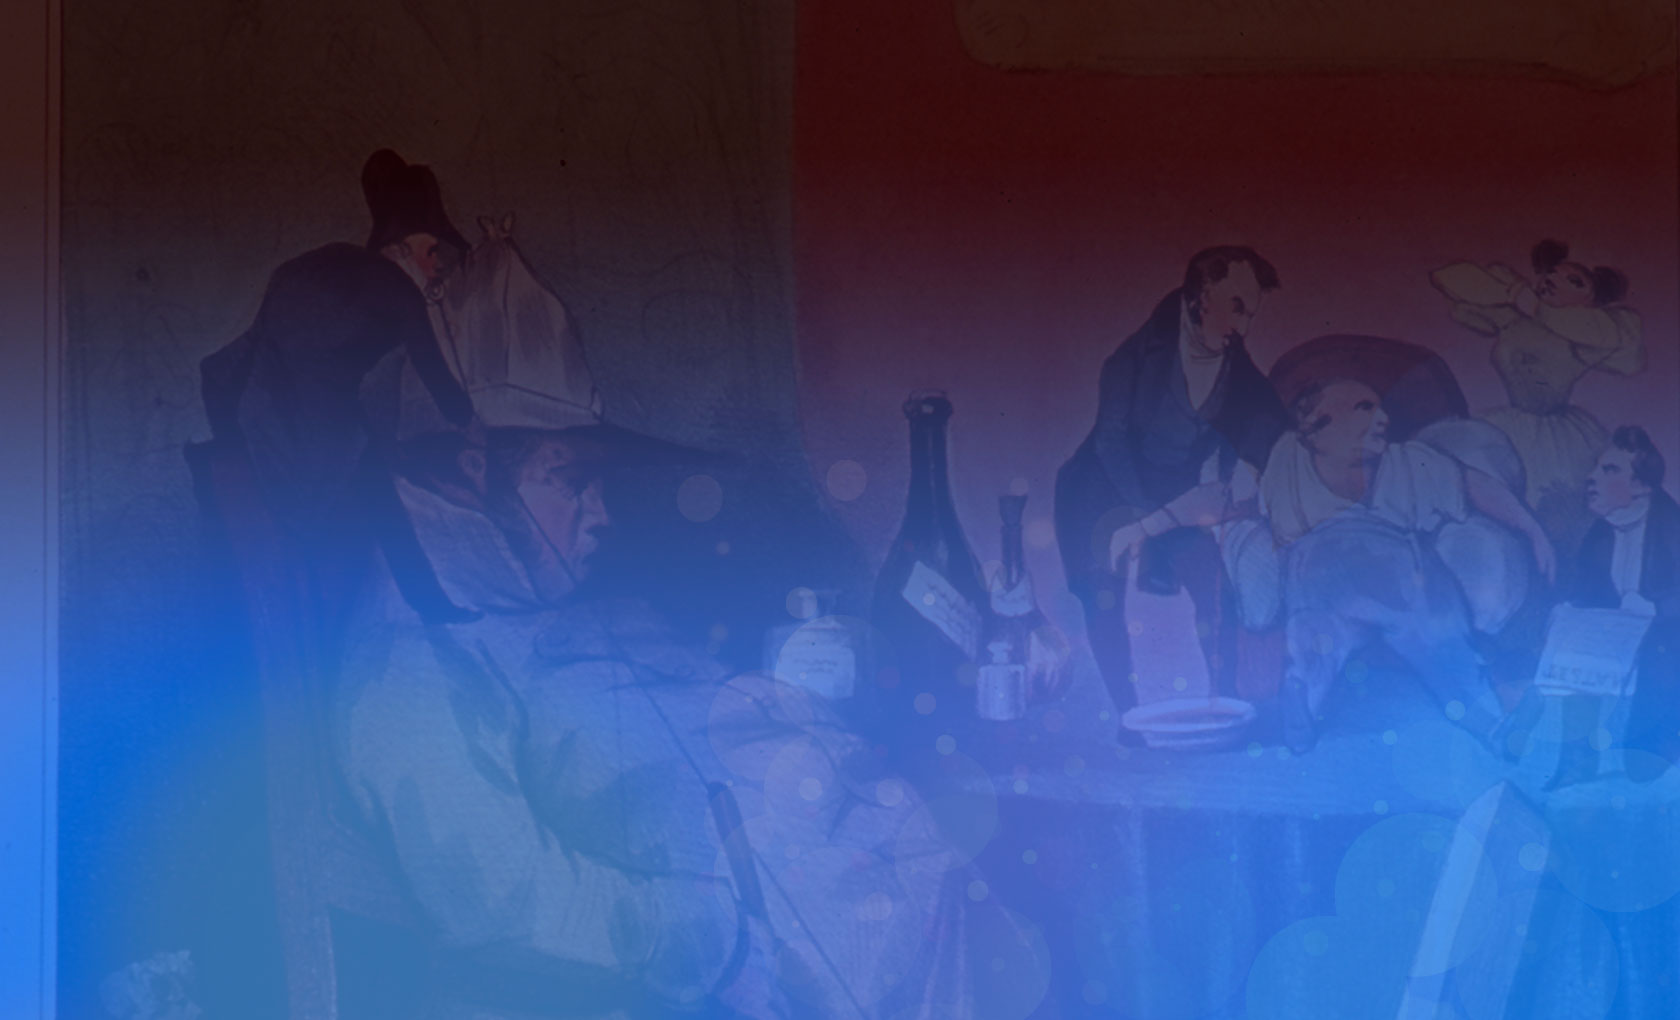 A seated man at a table with bottles, death-related scenes of smaller figures surround the man